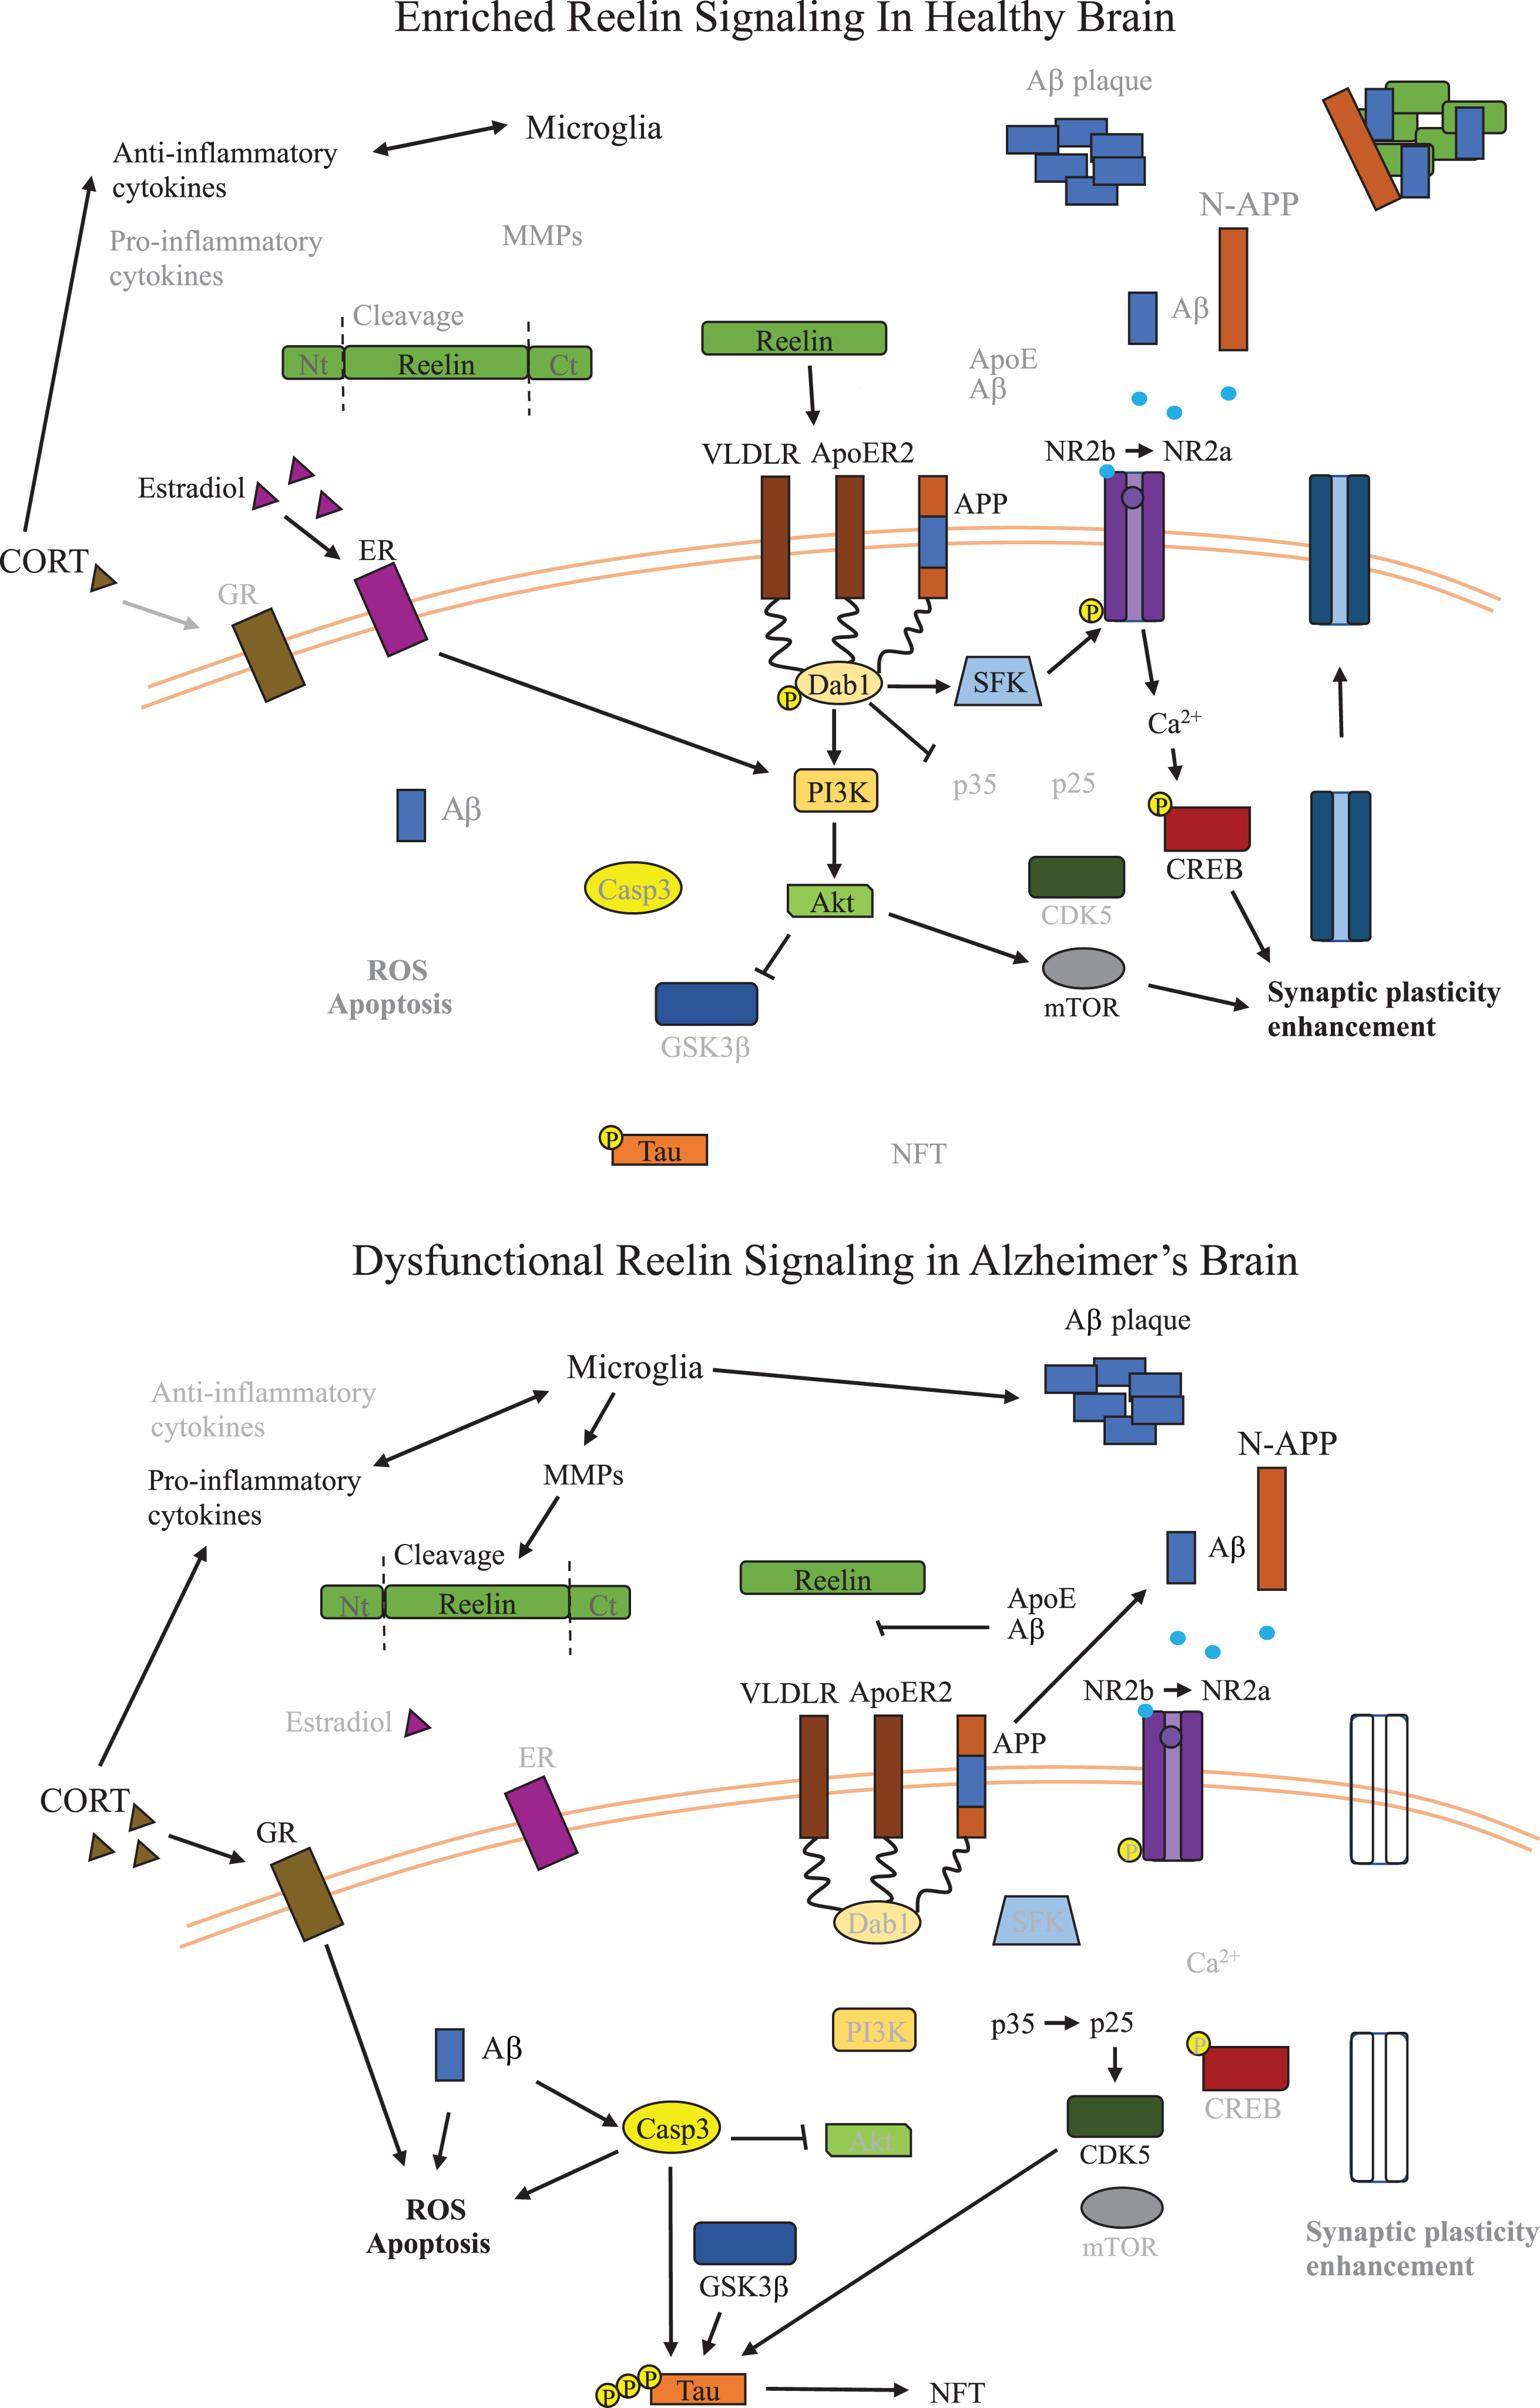 Dysfunctional Reelin Signaling in Alzheimer’s Disease Brain. Overview of the signaling pathways relevant to Reelin dysfunction and inflammation in AD relative to healthy brains. Reelin signaling leads to inactivation of GSK3β and loss of Reelin signaling in AD promotes formation of NFTs by dysregulating phosphorylation of tau. Reelin also promotes synaptic plasticity, which is critical for learning and cognitive function, and in AD, a reduction of Reelin signaling leads to disruption of synaptic plasticity. The potential role of microglia secreted MMPs on Reelin proteolytic processing are also shown, resulting in reduced Reelin signaling. The impact of alterations to glucocorticoids and estrogen on kinases along the Reelin signaling pathway are also shown in the context of AD, and both reduce activity of kinases downstream of Reelin leading to less inhibition of GSK3β. Aβ, amyloid-β; ApoE, apolipoprotein E; ApoER2, ApoE receptor 2; CDK5, cyclin-dependent kinase 5; CORT, corticosterone; CREB, cAMP-response element binding protein; CXCL2, chemokine (C-X-C motif) ligand 2; Dab1, disabled-1; ECM, extracellular matrix; GSK3β, glycogen synthase kinase 3-beta; IL-1β, interleukin 1-beta; IL-6, interleukin 6; GR, glucocorticoid receptor; MMP, matrix metalloproteases; mTOR, metabolic target of rapamycin; NFT, neurofibrillary tangles; NLRP3, NLR family pyrin domain containing 3; NR2b/a, N-methyl D-aspartate receptor subtype 2B/2A; N-APP, N-terminal amyloid β precursor protein; PI3K, phosphoinositide 3-kinase; p-tau, phosphorylated tau; ROS, reactive oxygen species; SERT, serotonin transporter; VLDLR, very low density lipoprotein receptor.